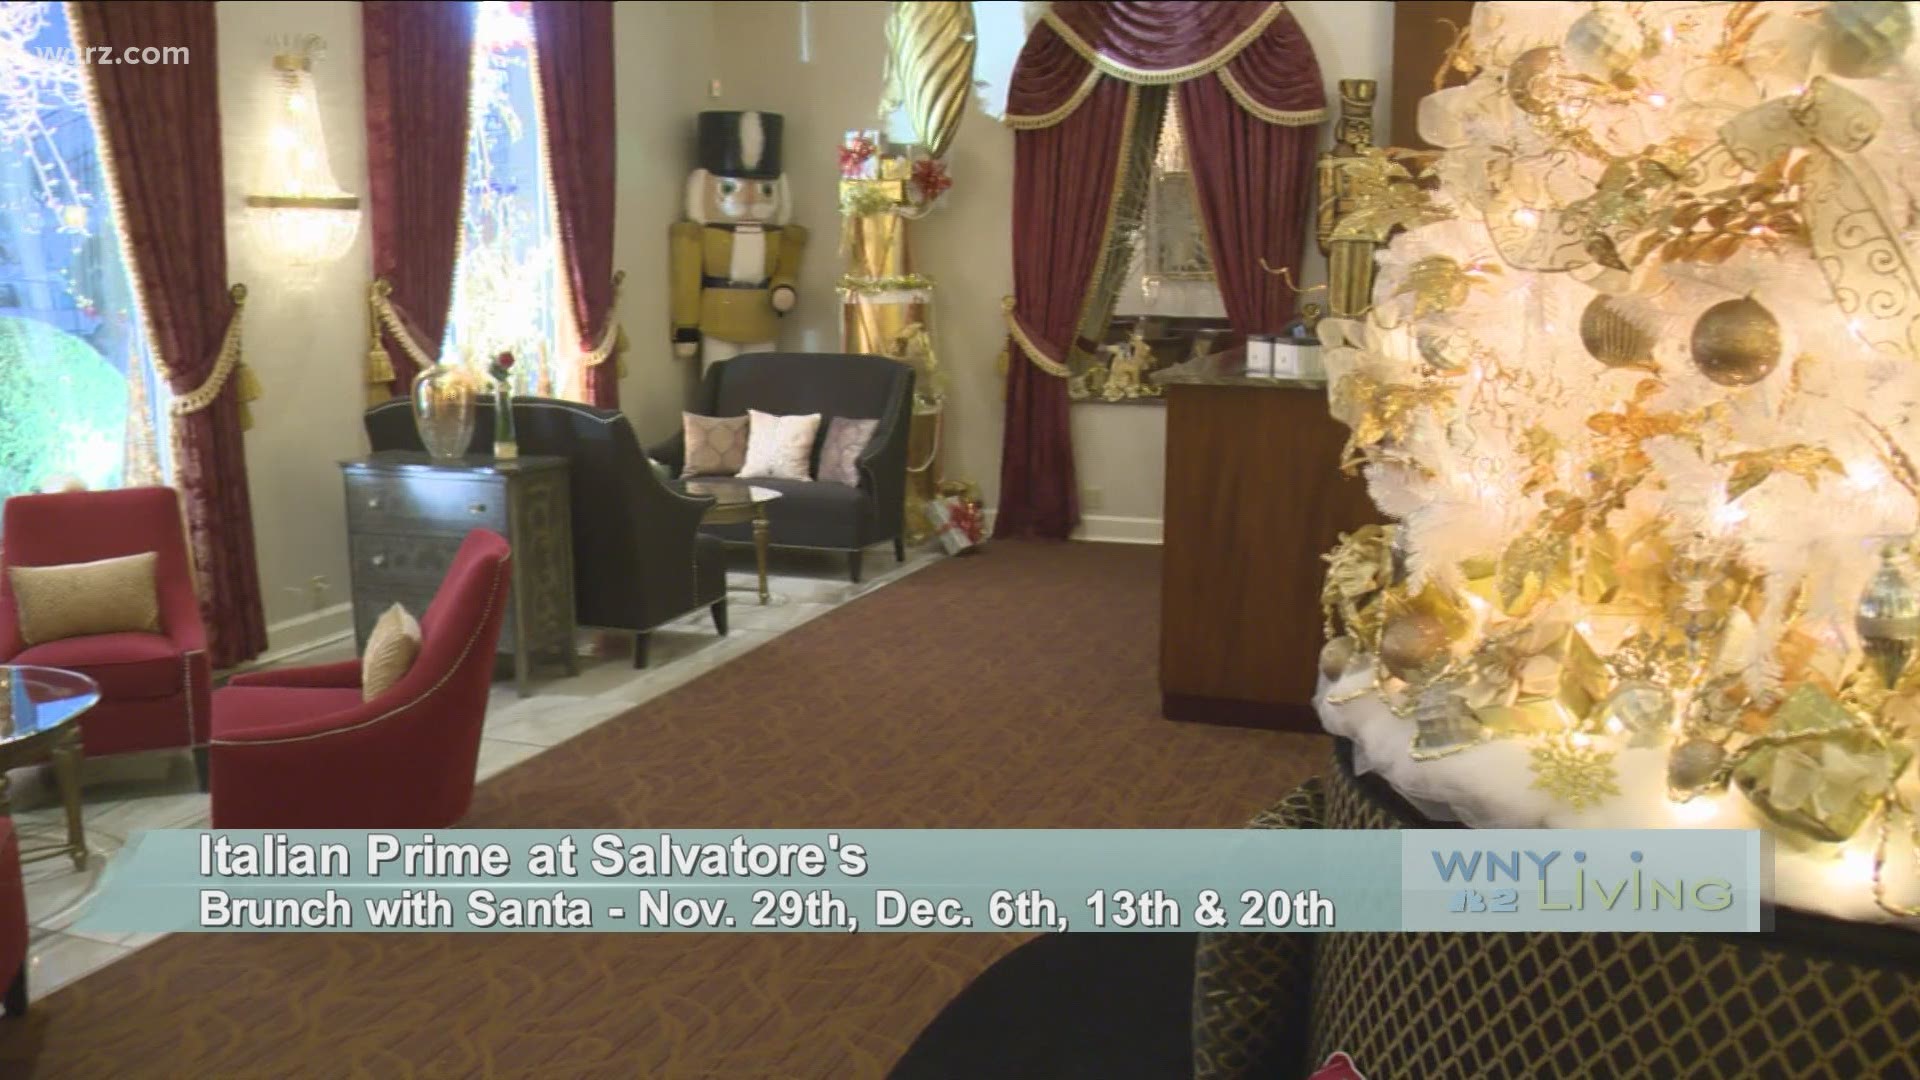 WNY Living - November 21 - Italian Prime at Salvatore's (THIS VIDEO IS SPONSORED BY ITALIAN PRIME AT SALVATORE'S)